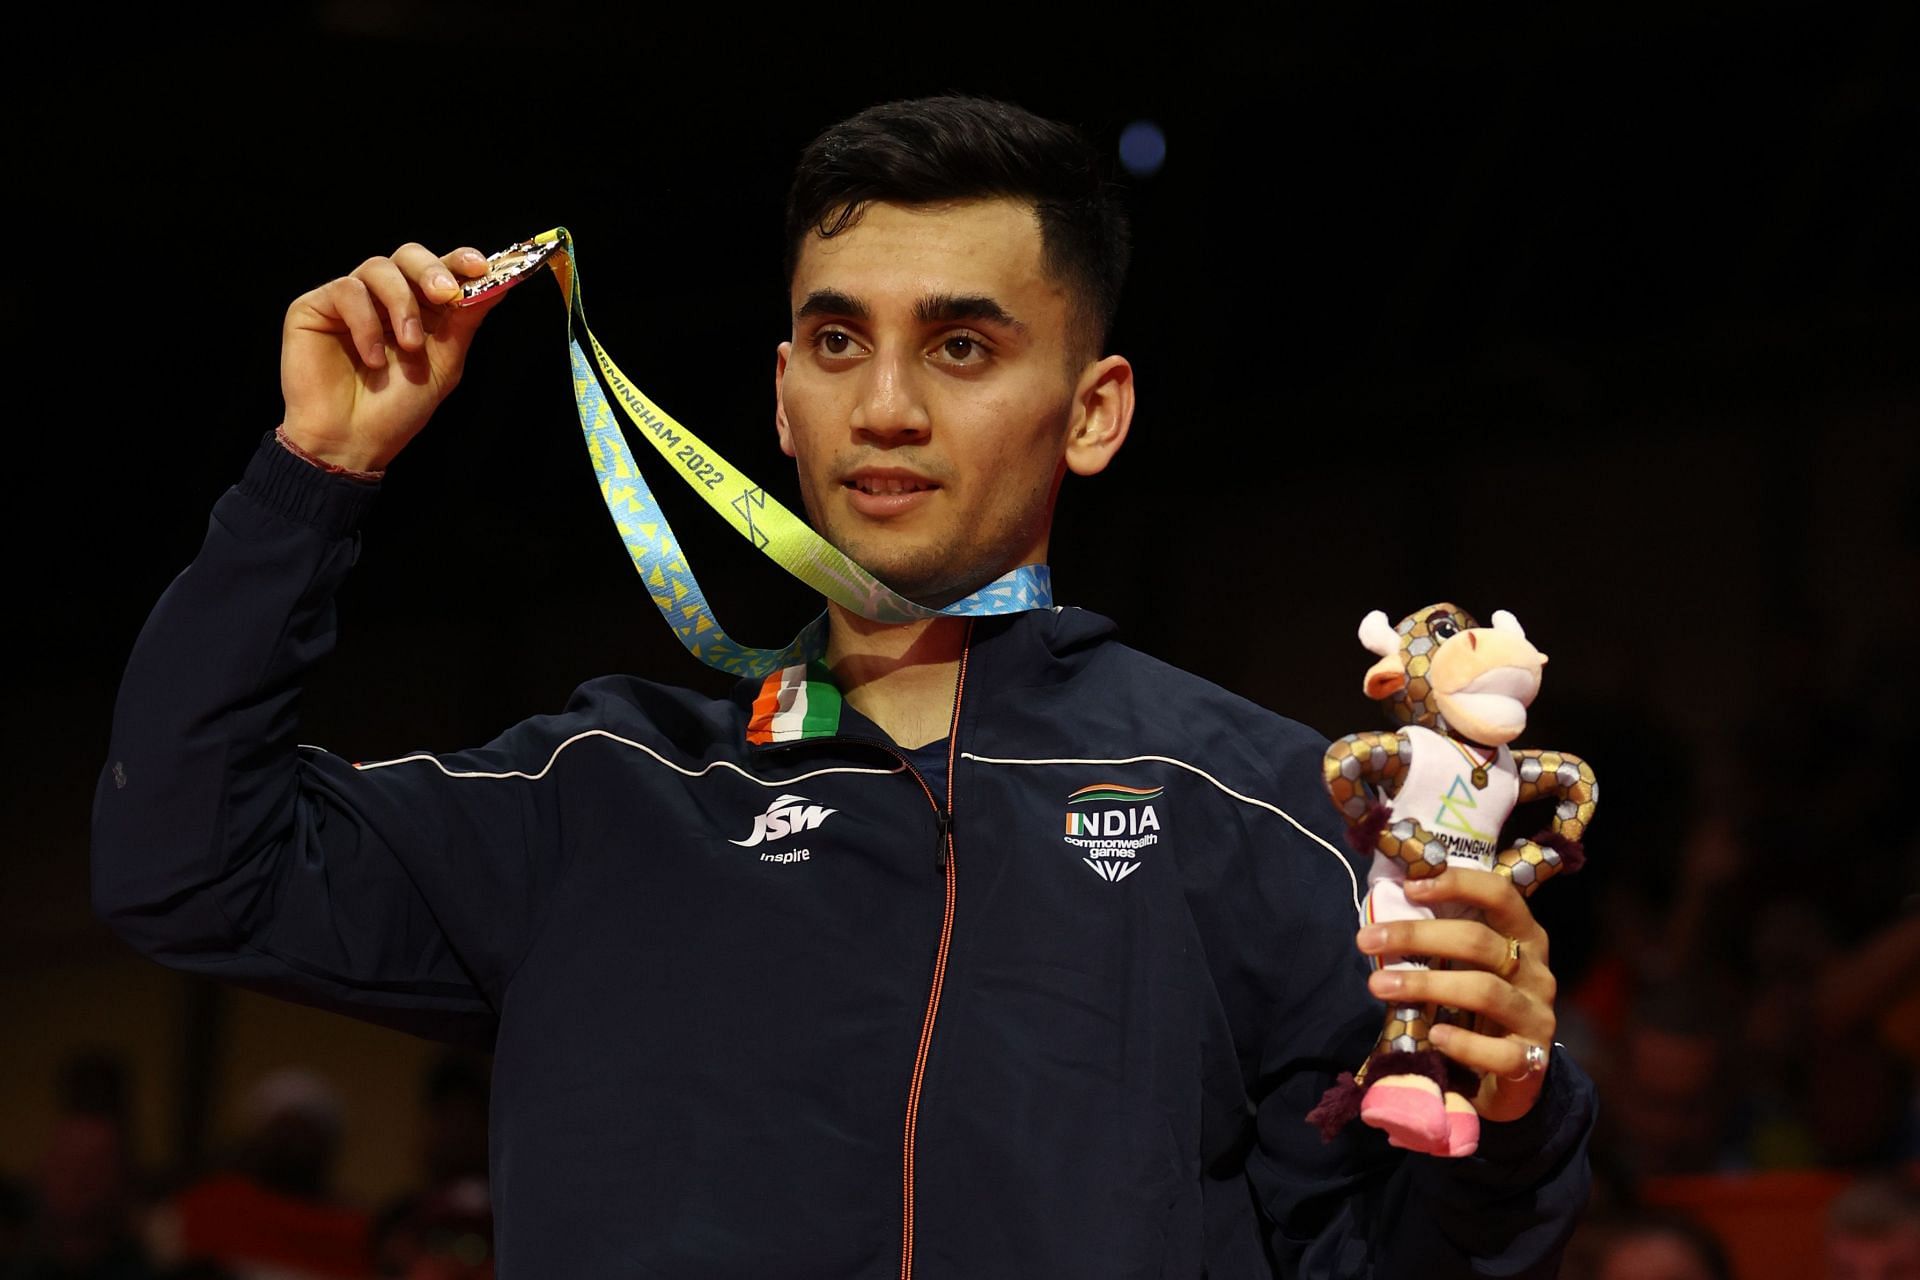 Lakshya Sen with the CWG 2022 gold medal. (Image courtesy: Getty)